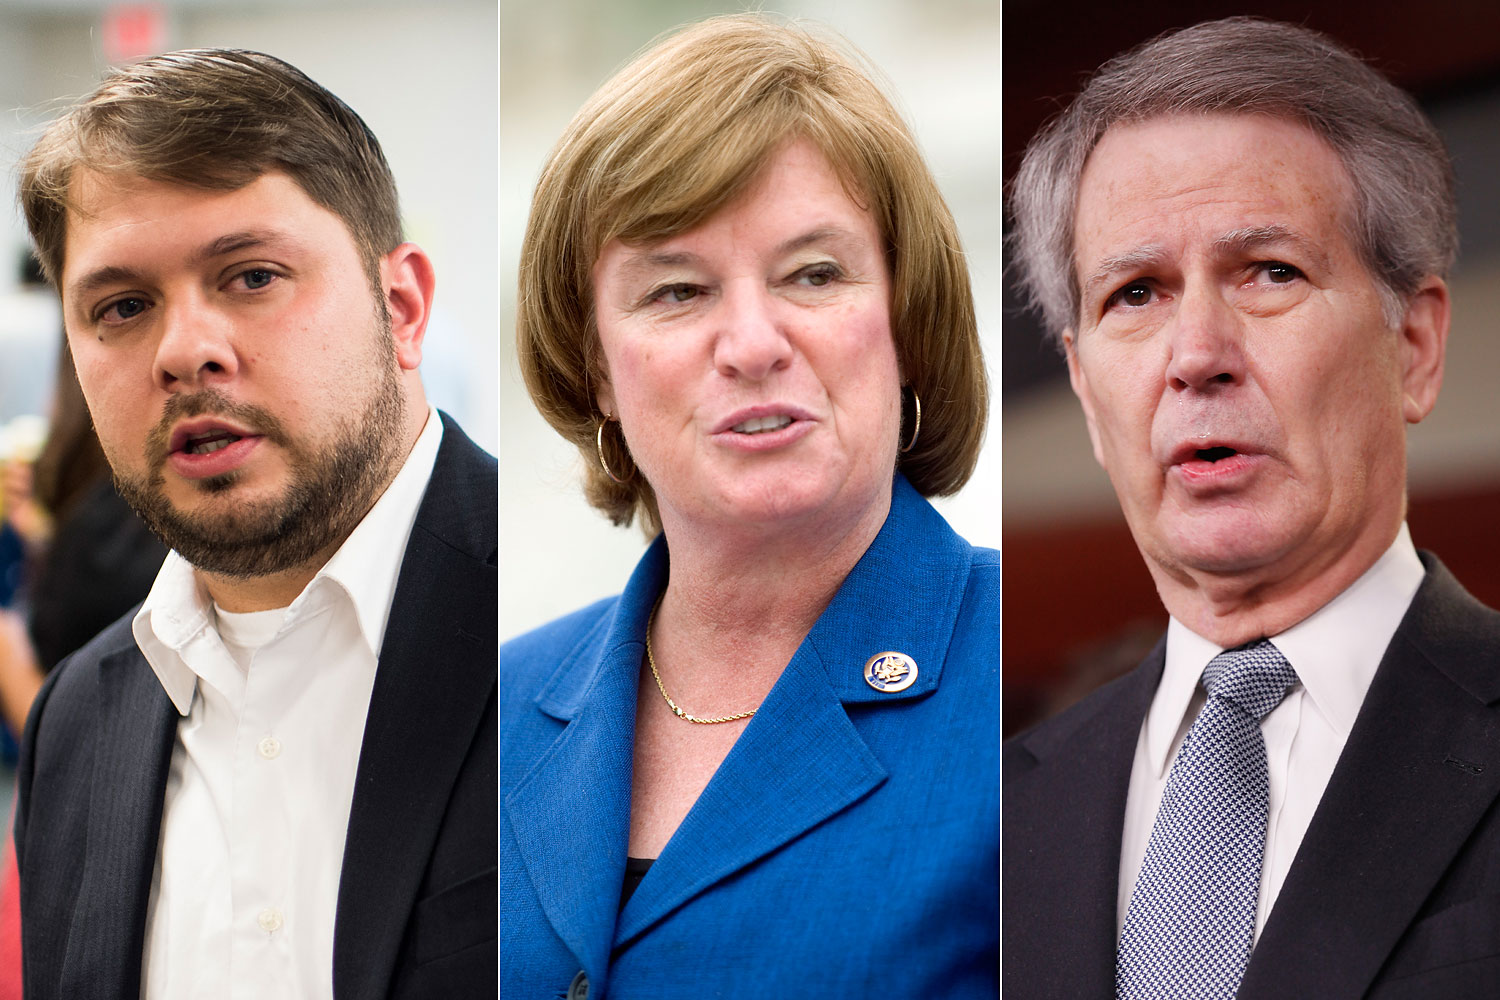 From left to right: Ruben Gallego, Carol Shea-Porter, Walter Jones (Getty Images (3))